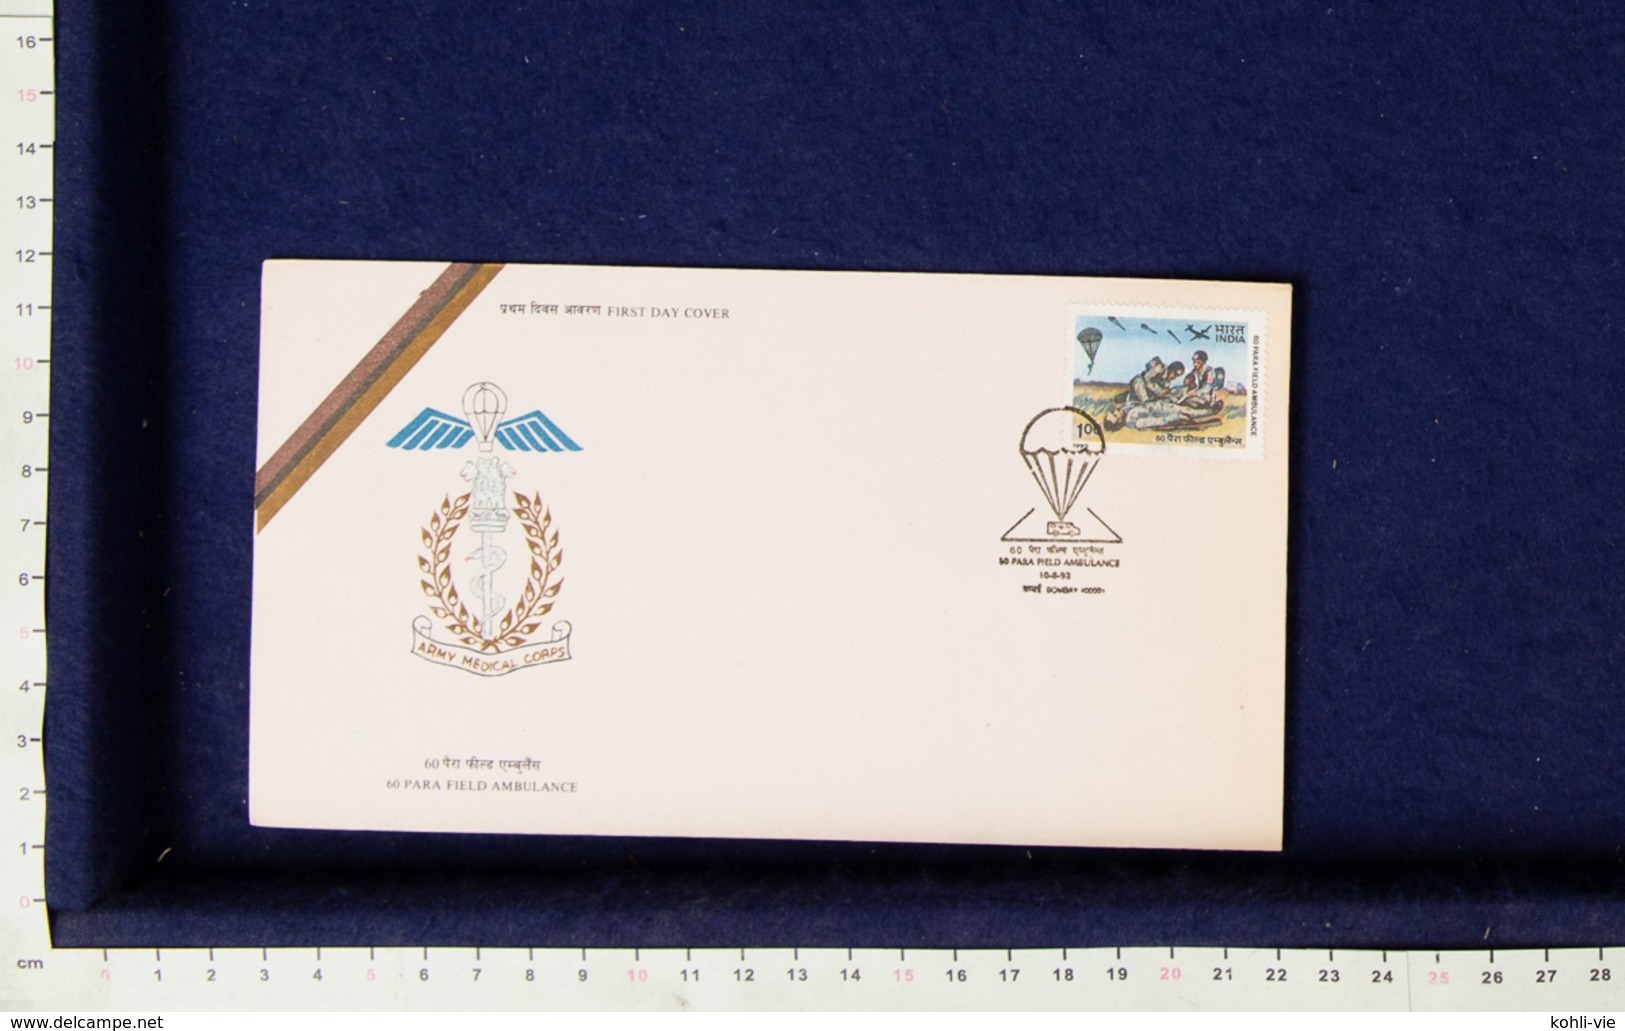 FDC 60 Para Field Ambulance - INDIEN INDIA 1993 (A077) - FDC